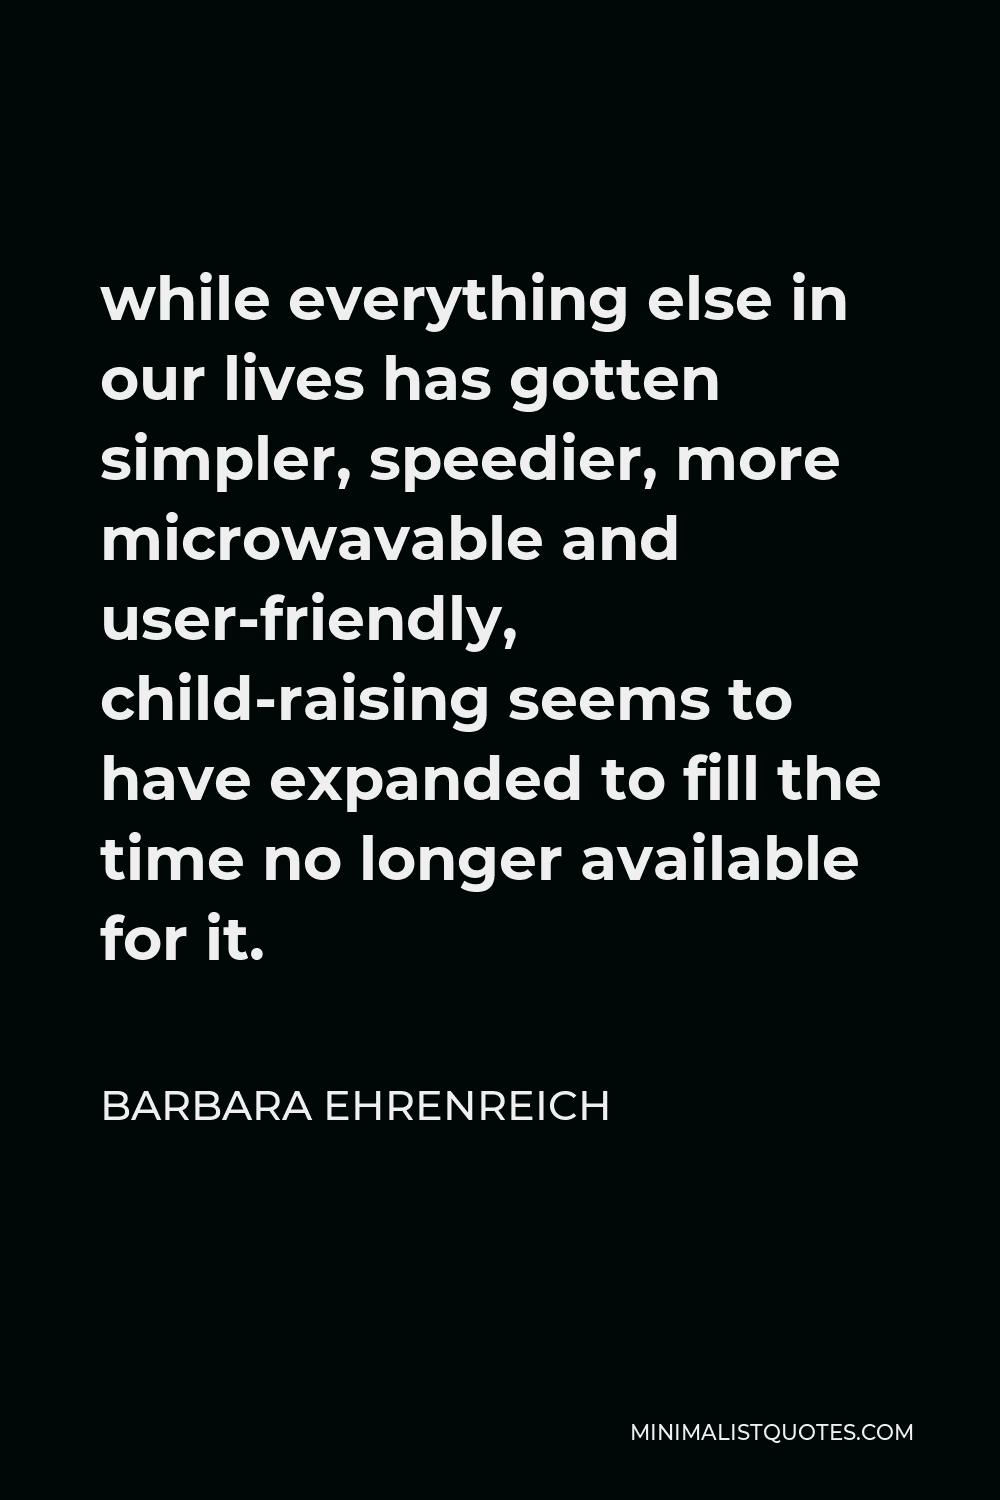 Barbara Ehrenreich Quote - while everything else in our lives has gotten simpler, speedier, more microwavable and user-friendly, child-raising seems to have expanded to fill the time no longer available for it.